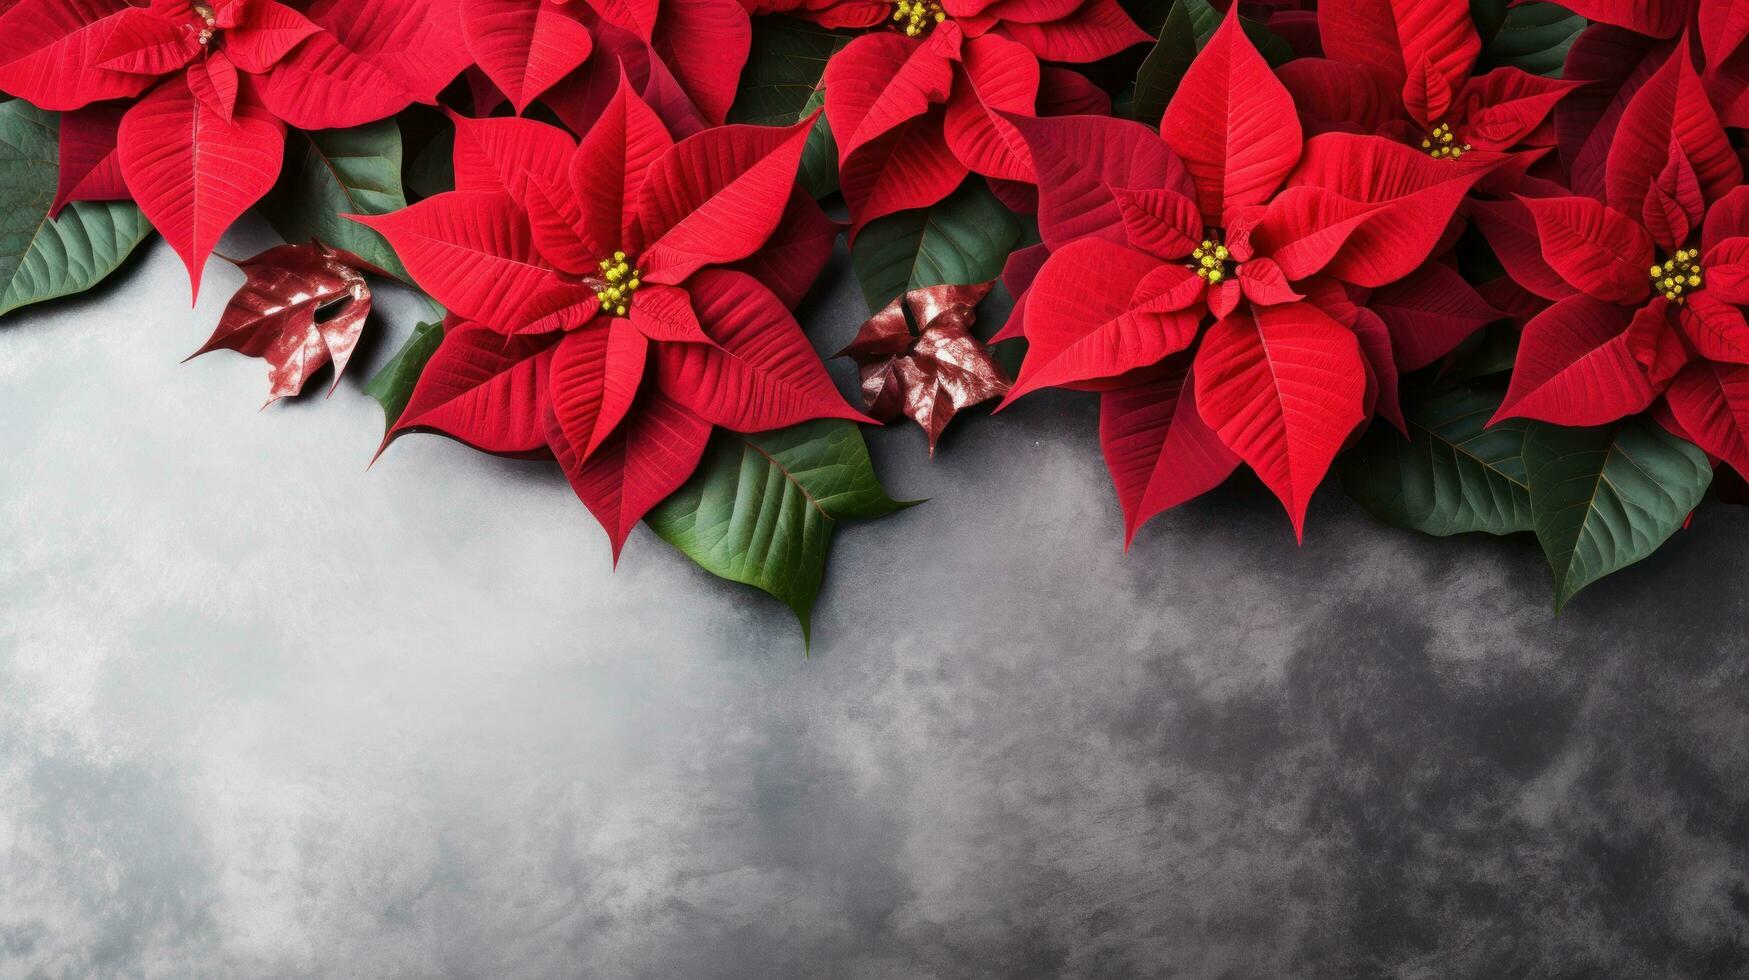 poinsettia flowers with copy space photo